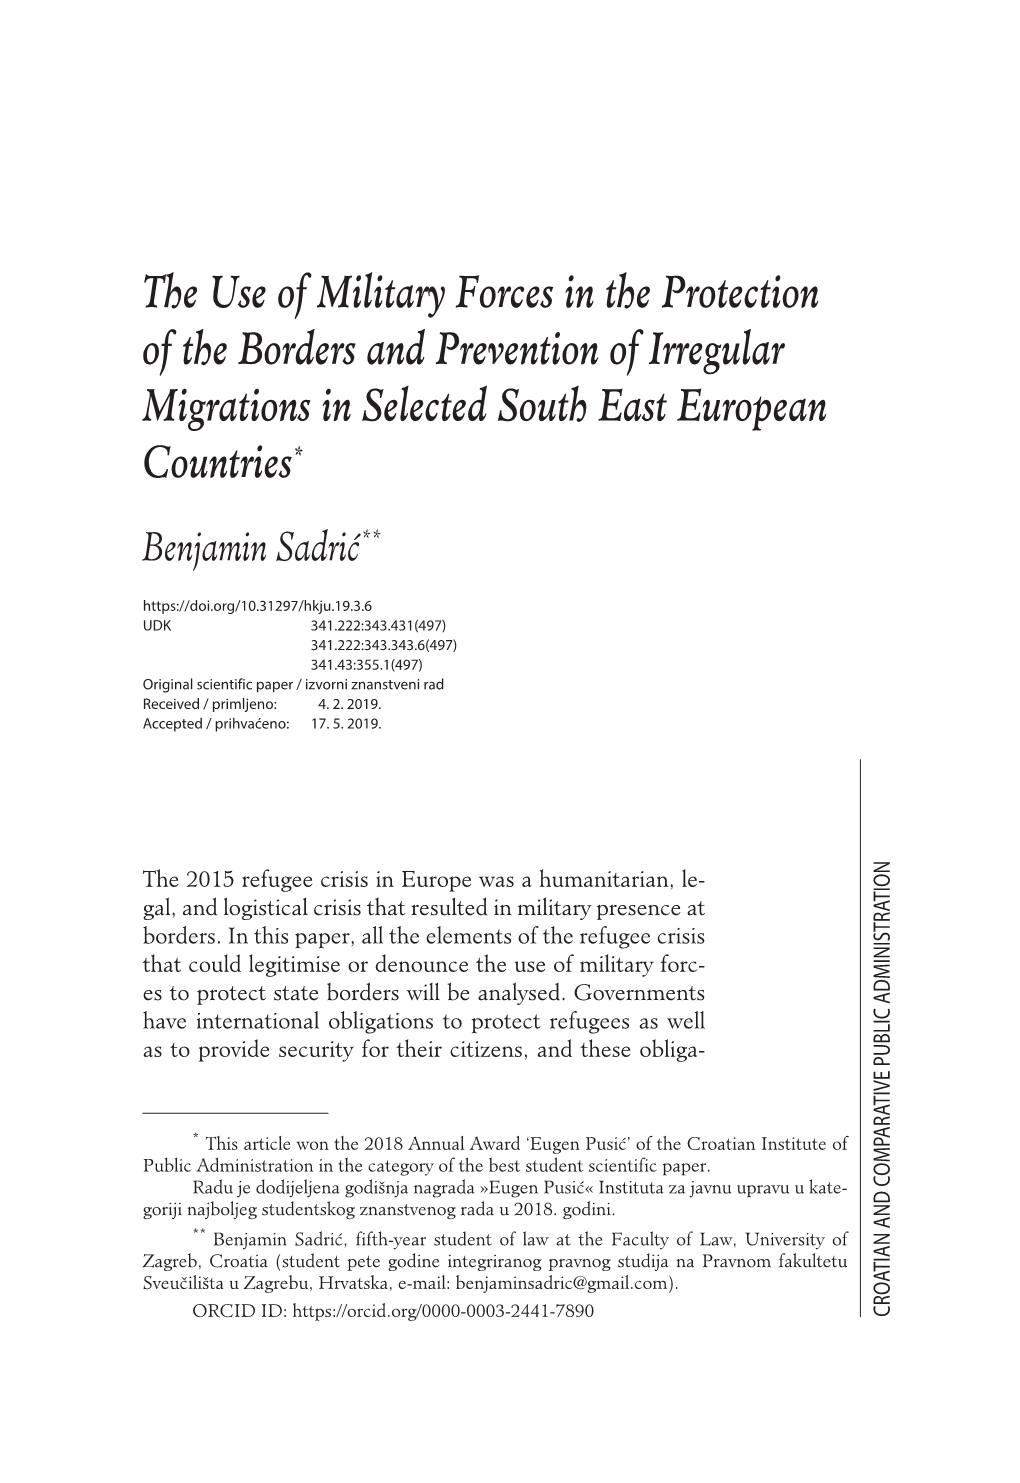 The Use of Military Forces in the Protection of the Borders and Prevention